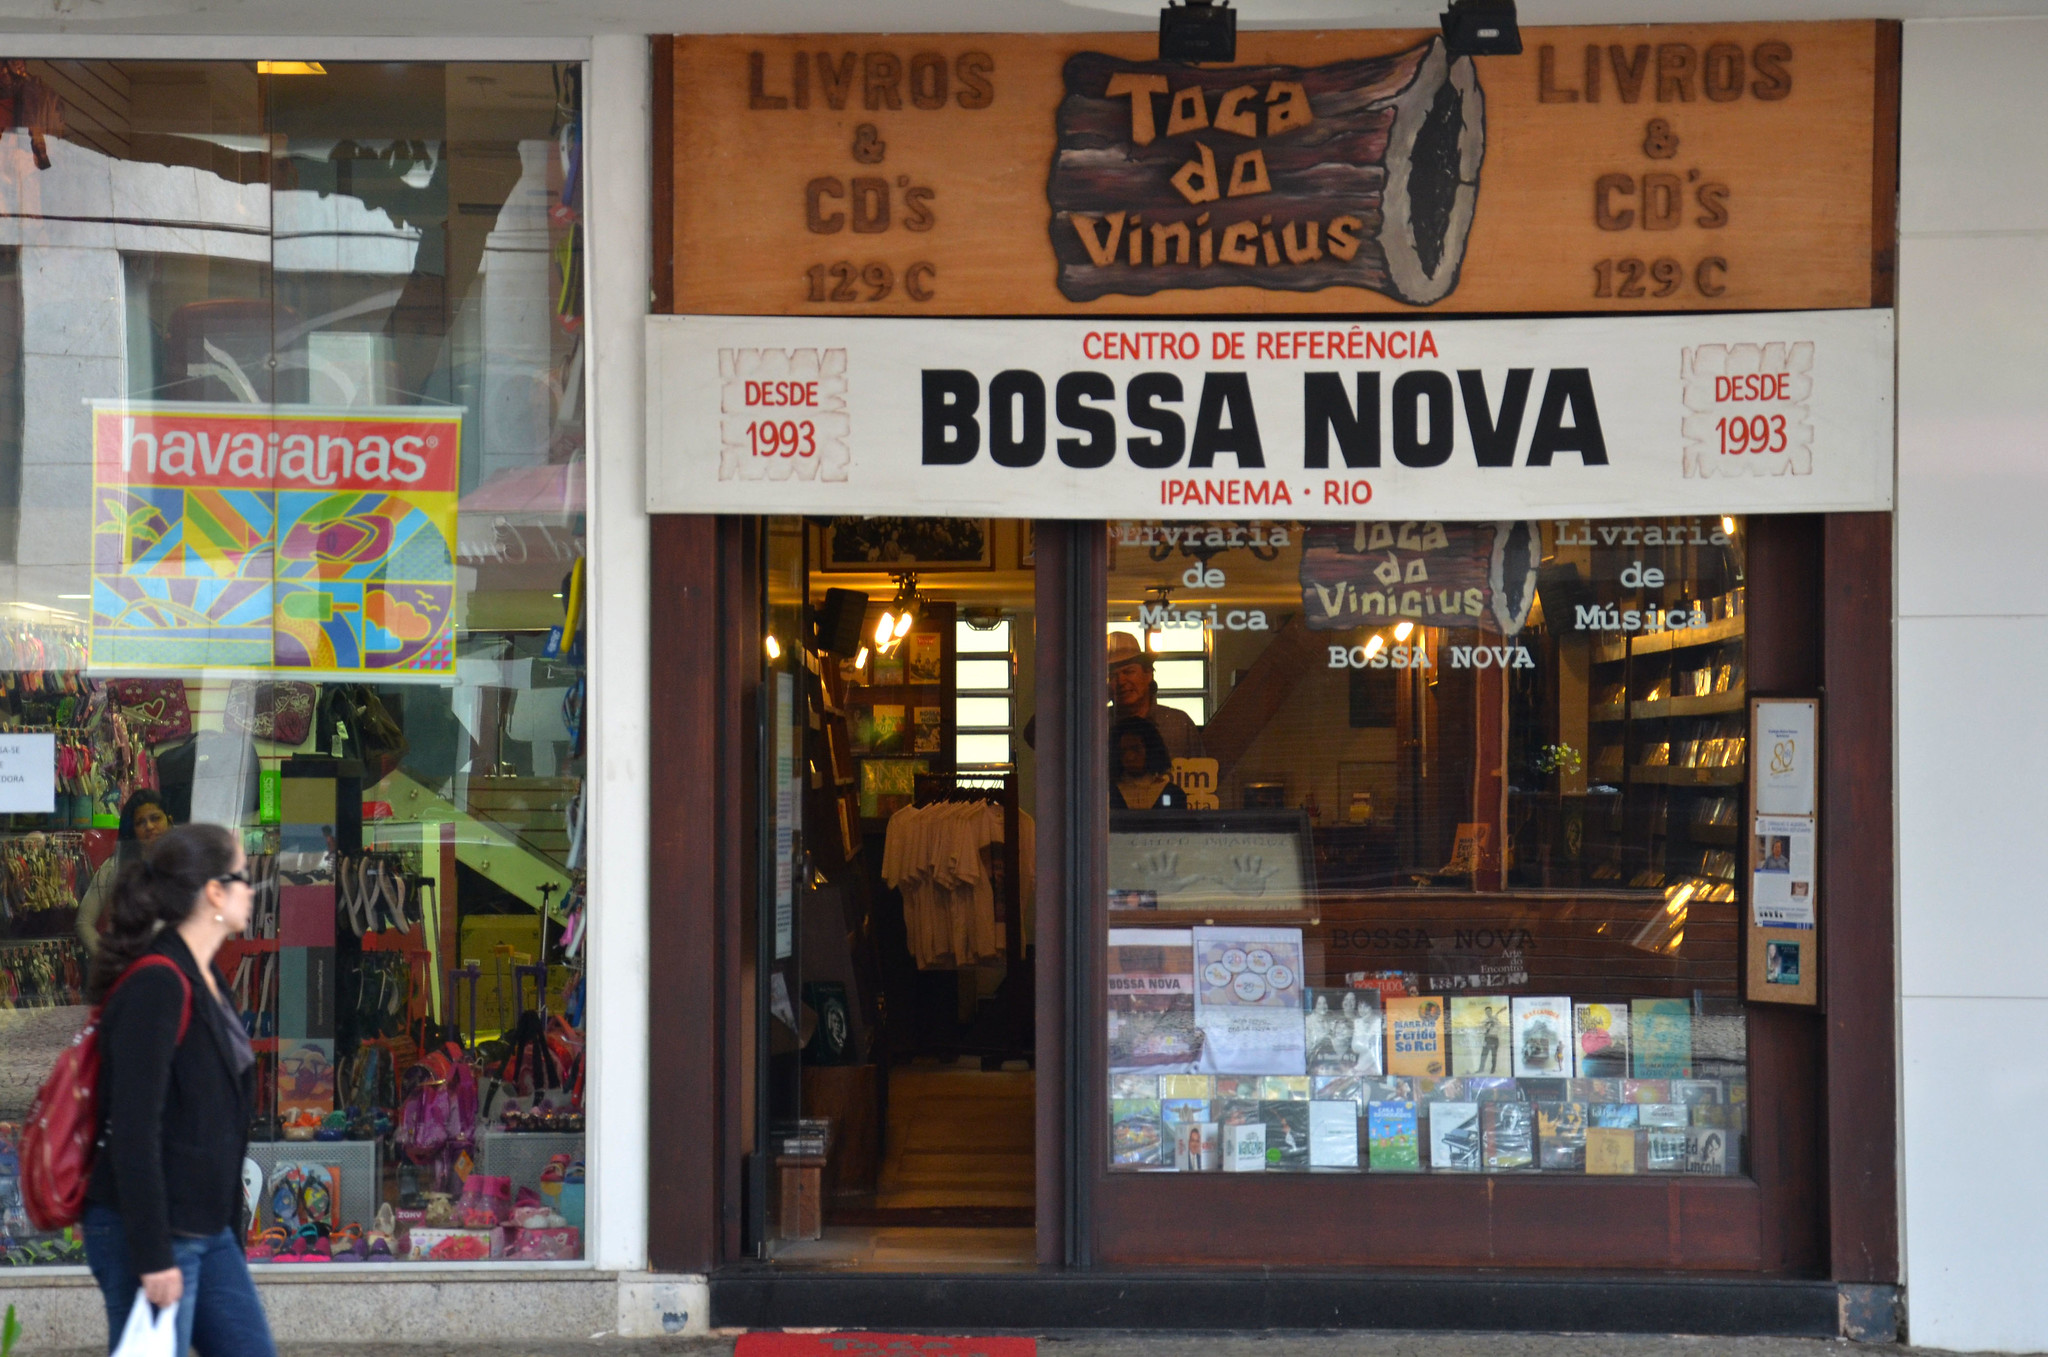 A person walks by a store front. Over the door, a sign reads 'Bossa Nova' and another reads 'Toca do Vinicius'. The store appears to sell books and CDs.